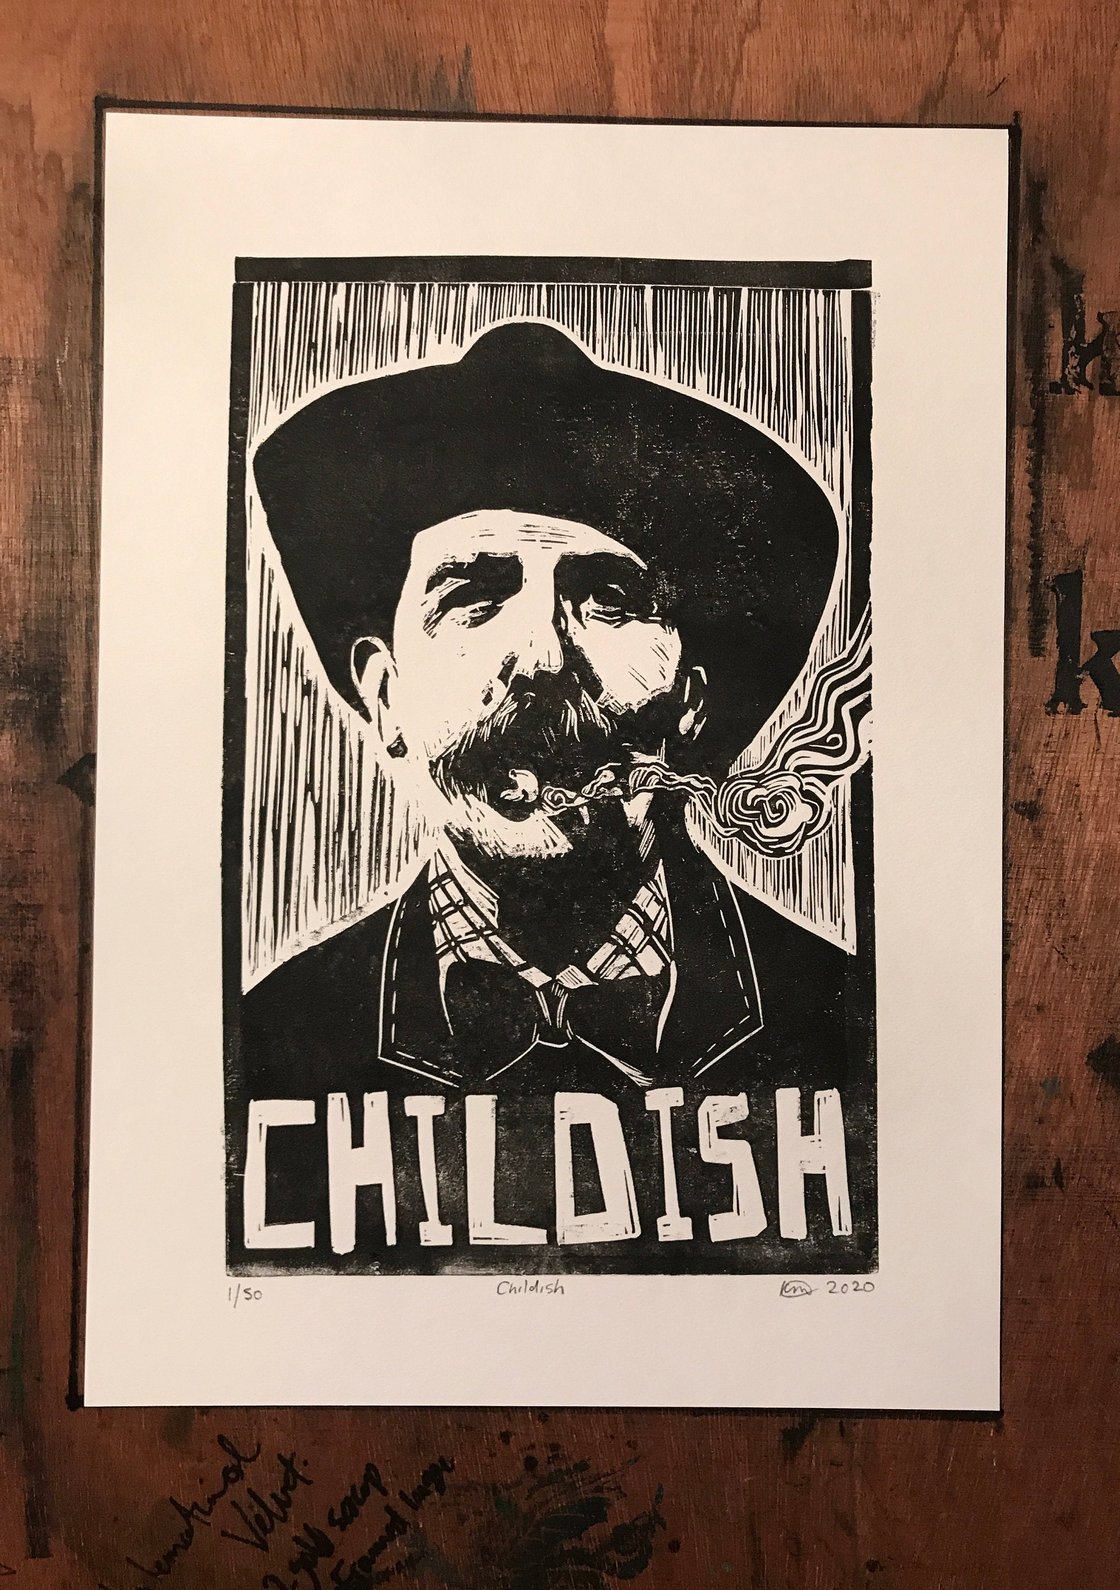 Image of Billy Childish. Hand Made. Original A4 linocut print. Limited and Signed. Art.